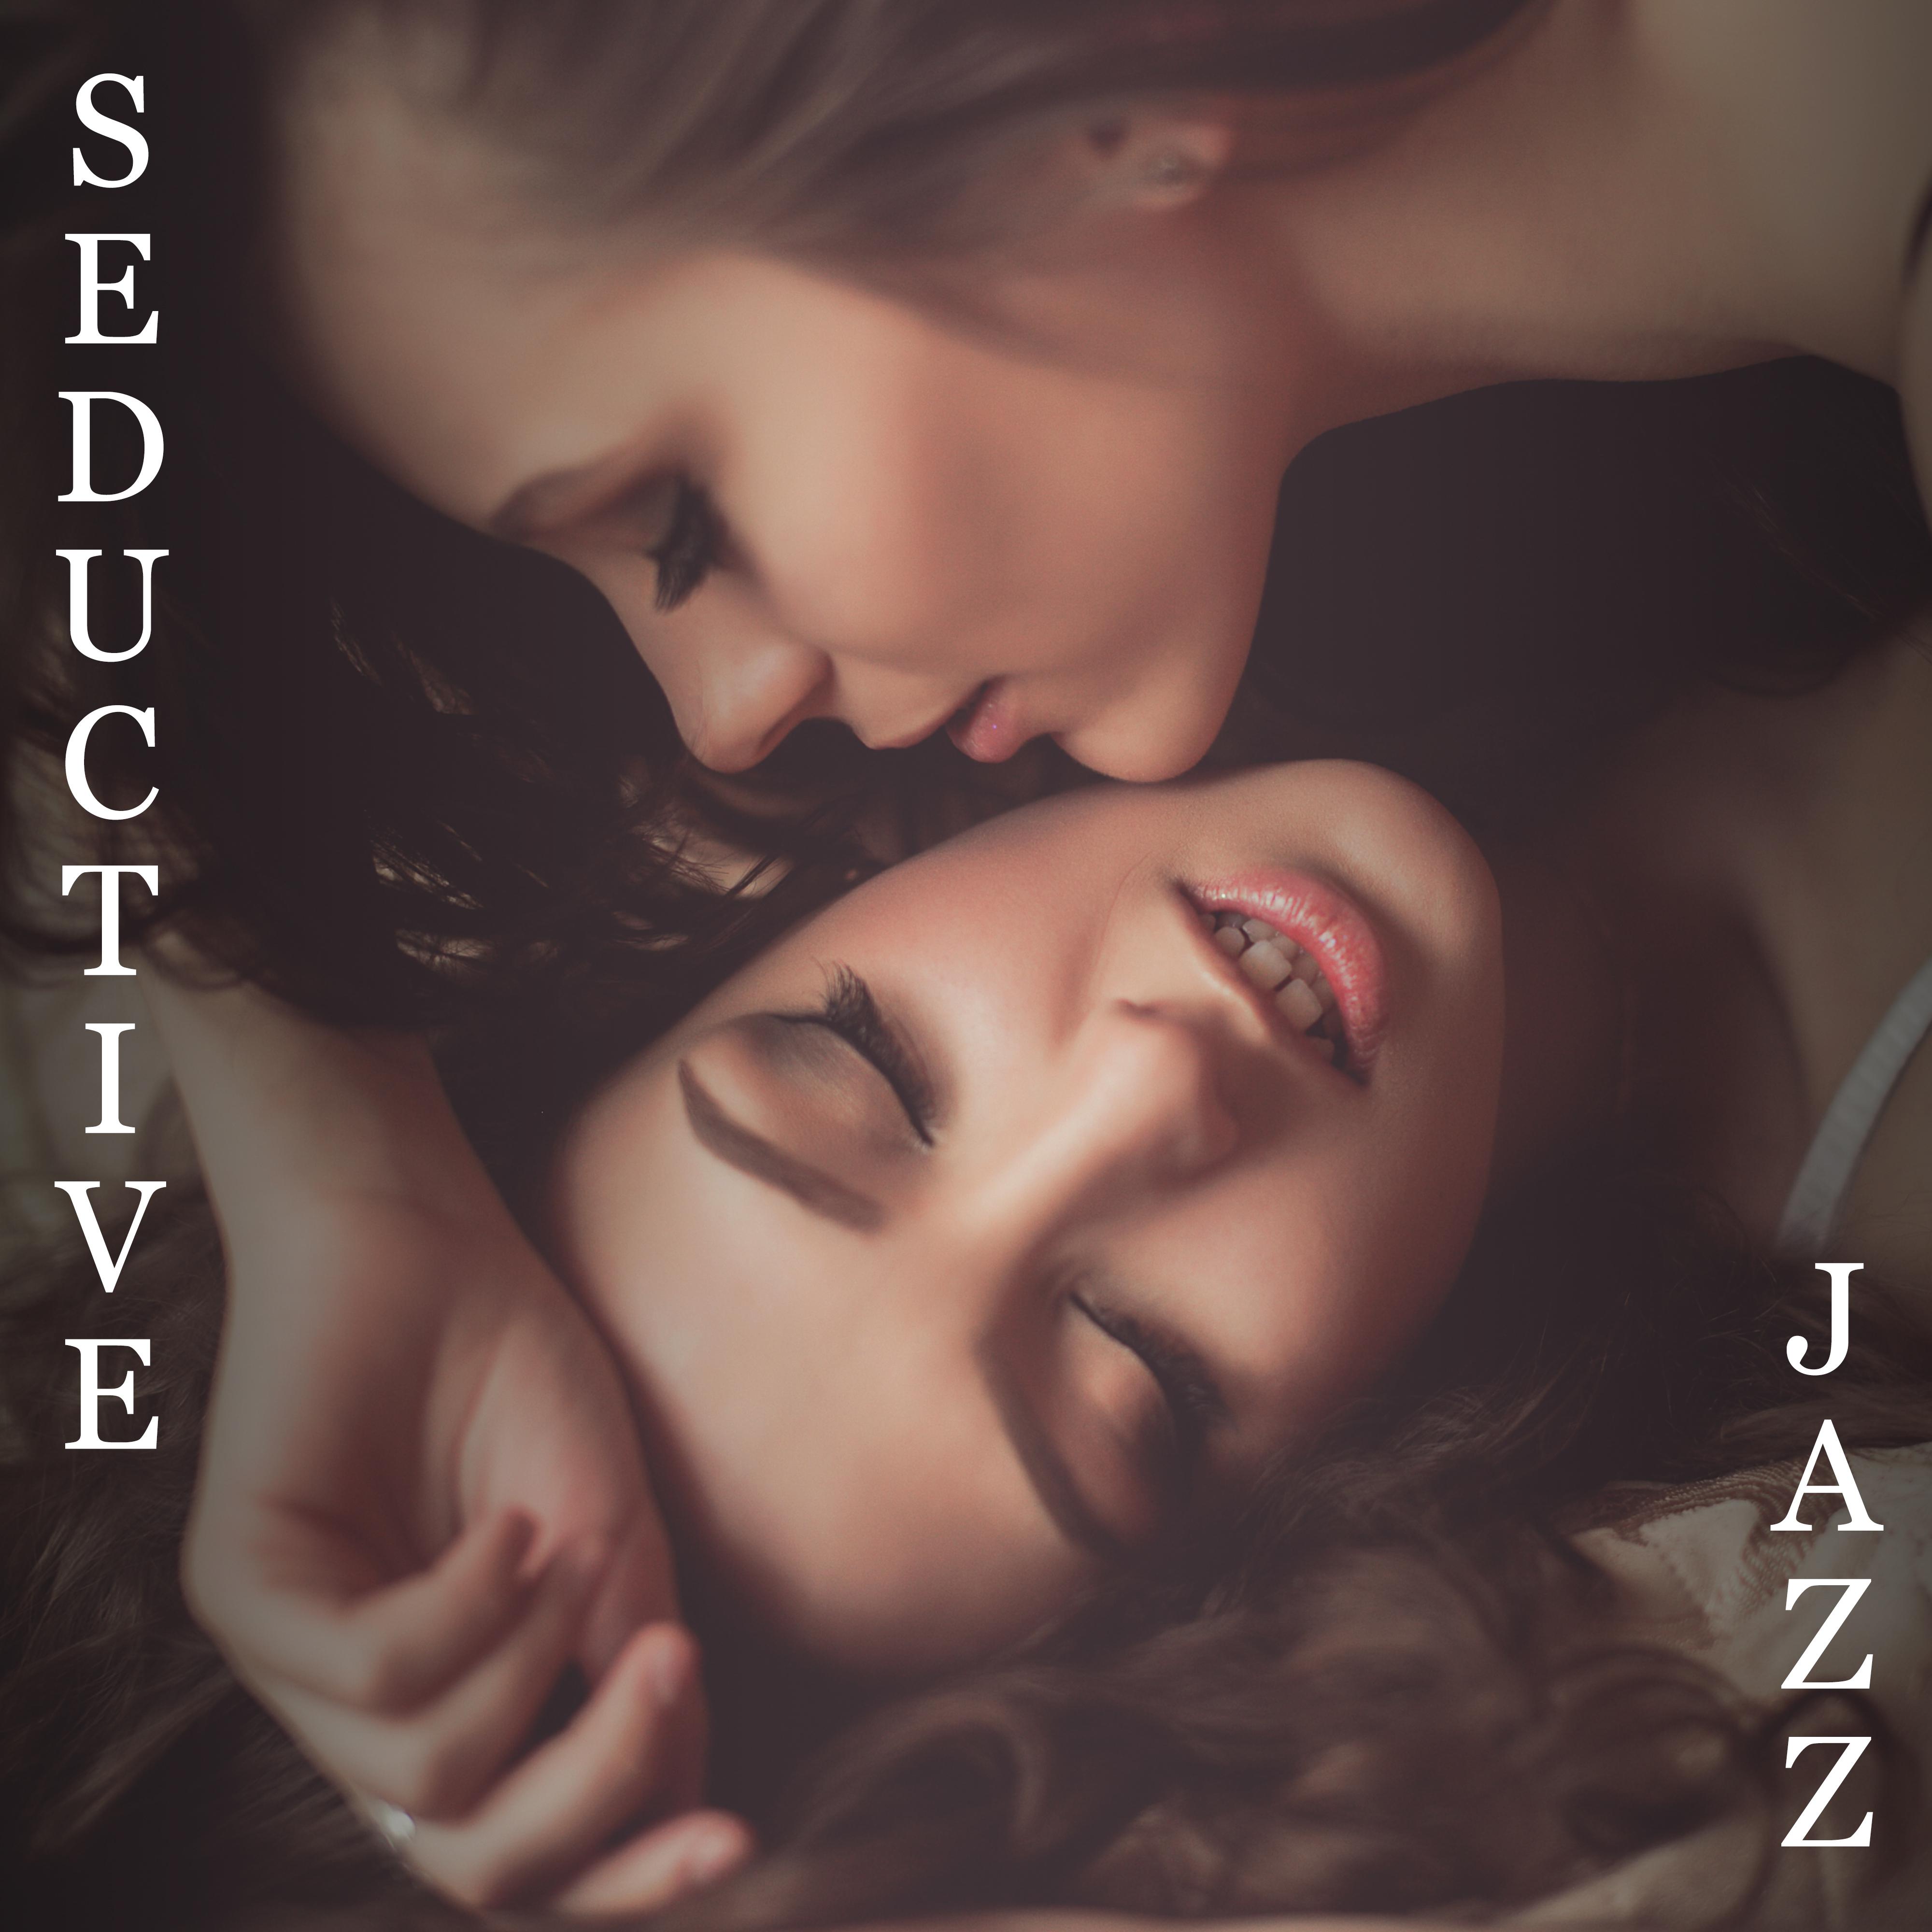 Seductive Jazz: **** Melodies for a Romantic Evening, Dinner with Red Wine, All-Night Love and Passionate Kisses, Sensual Dance and Full of Eroticism Passionate ***